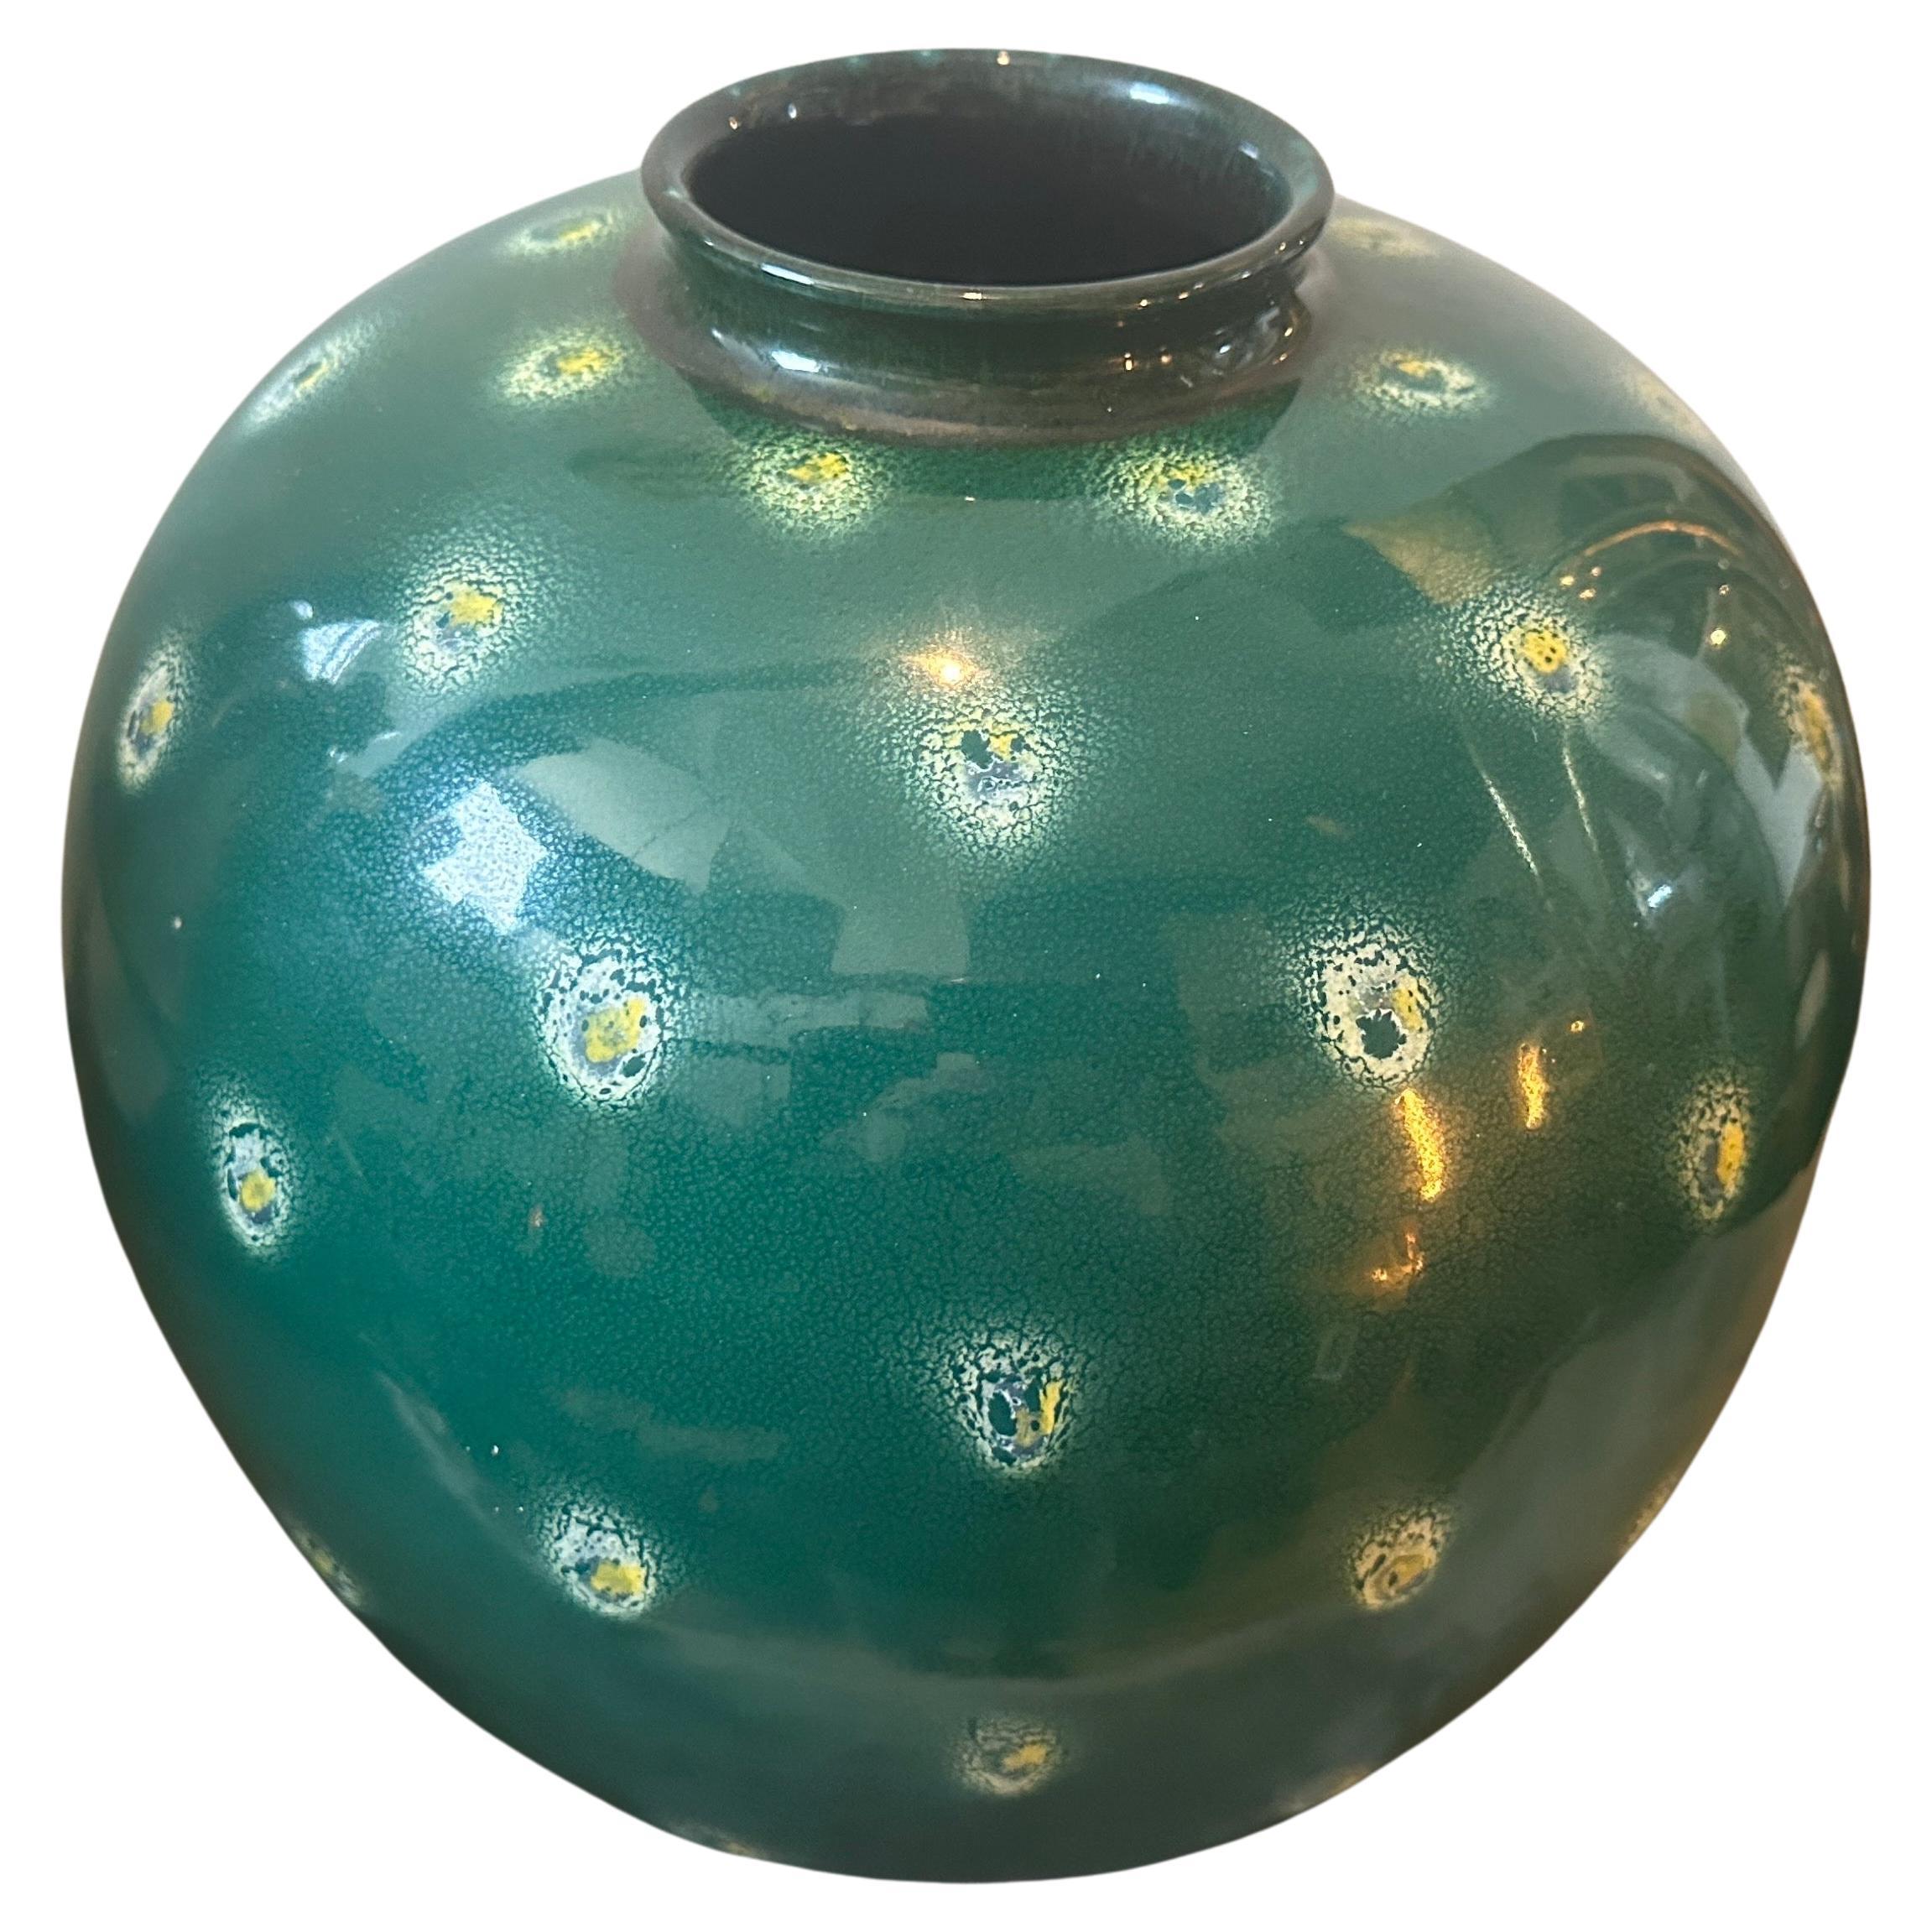 A green ceramic vase dated 1955, designed and manufactured in Sicily in the small town of Santo Stefano di Camastra, famous for hand-crafted ceramics, may items of the period have been influenced by Gio Ponti. The vase is an exquisite example of the